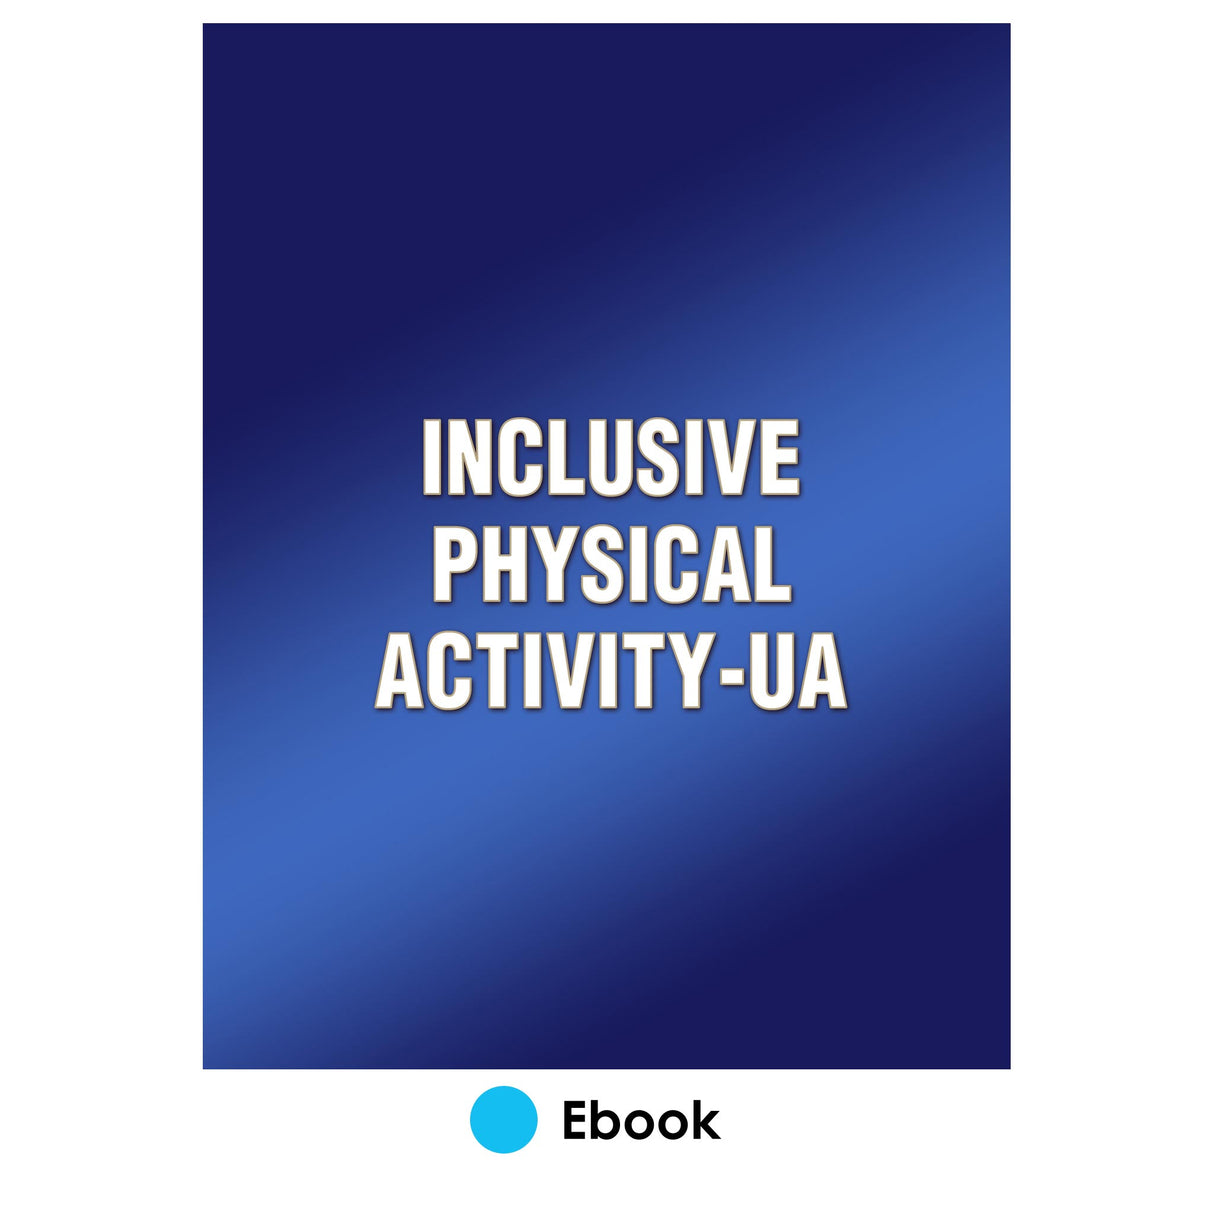 Inclusive Physical Activity-UA